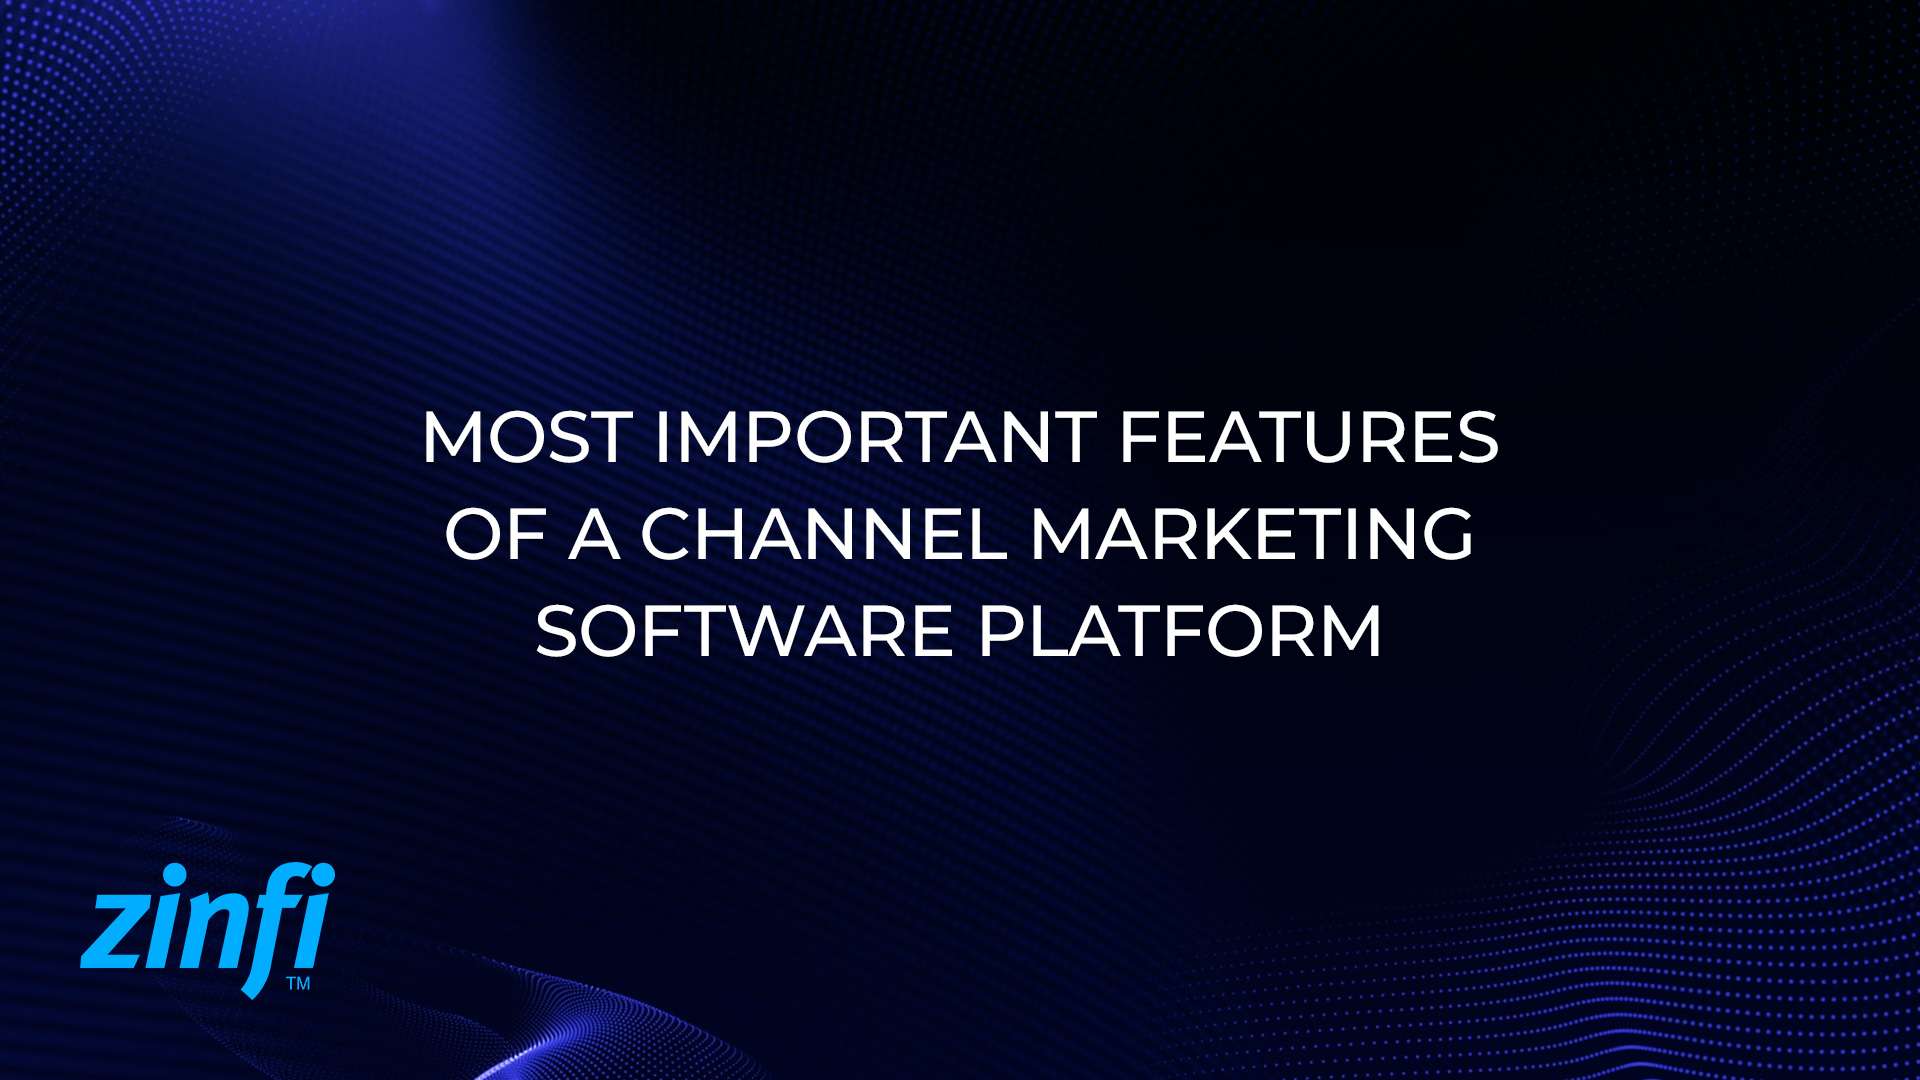 Channel Marketing with Key Software Features